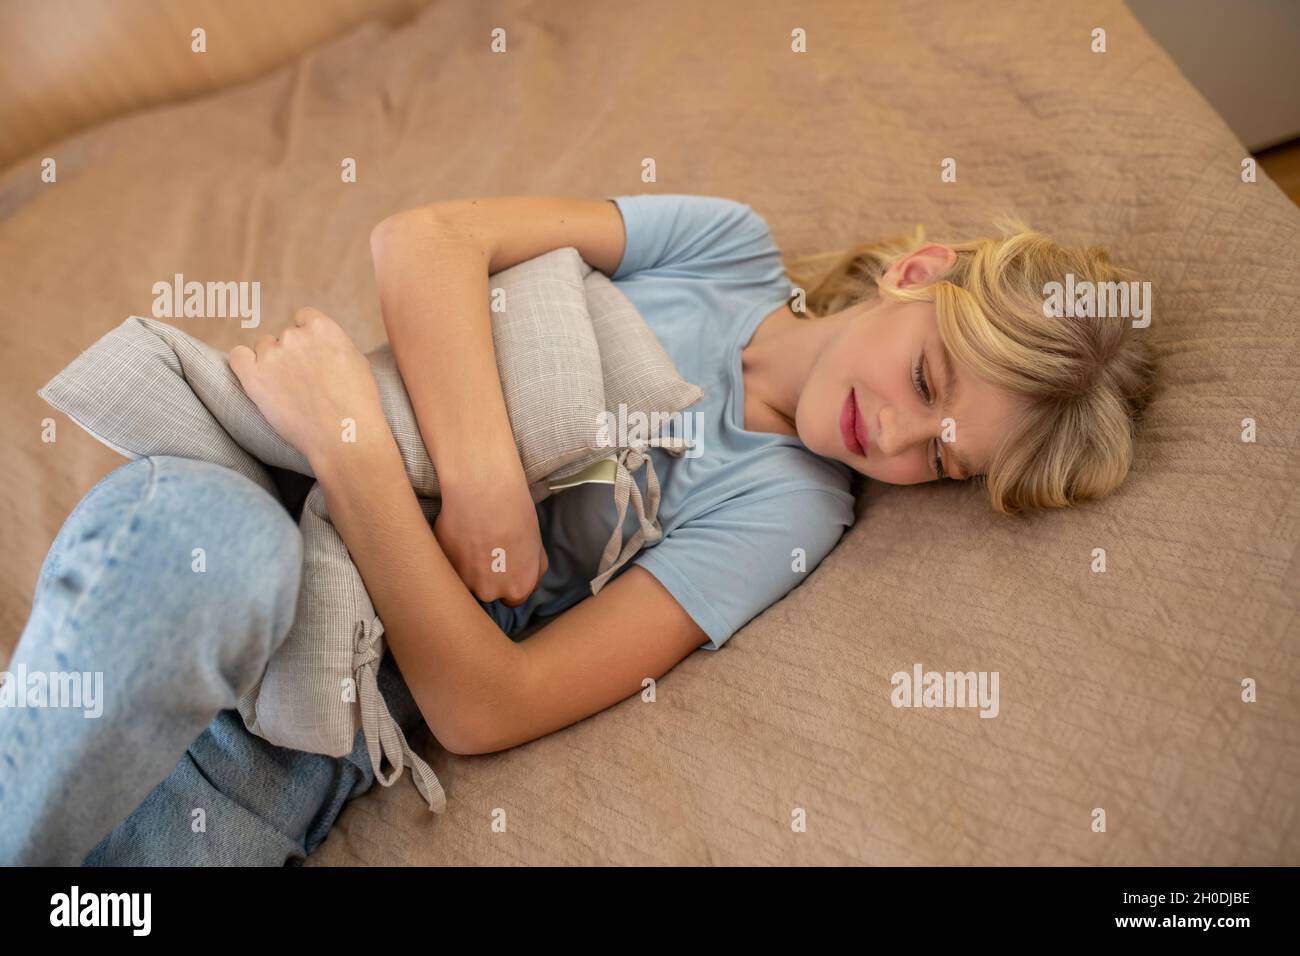 A girl having her critical days and suffering from pain Stock Photo